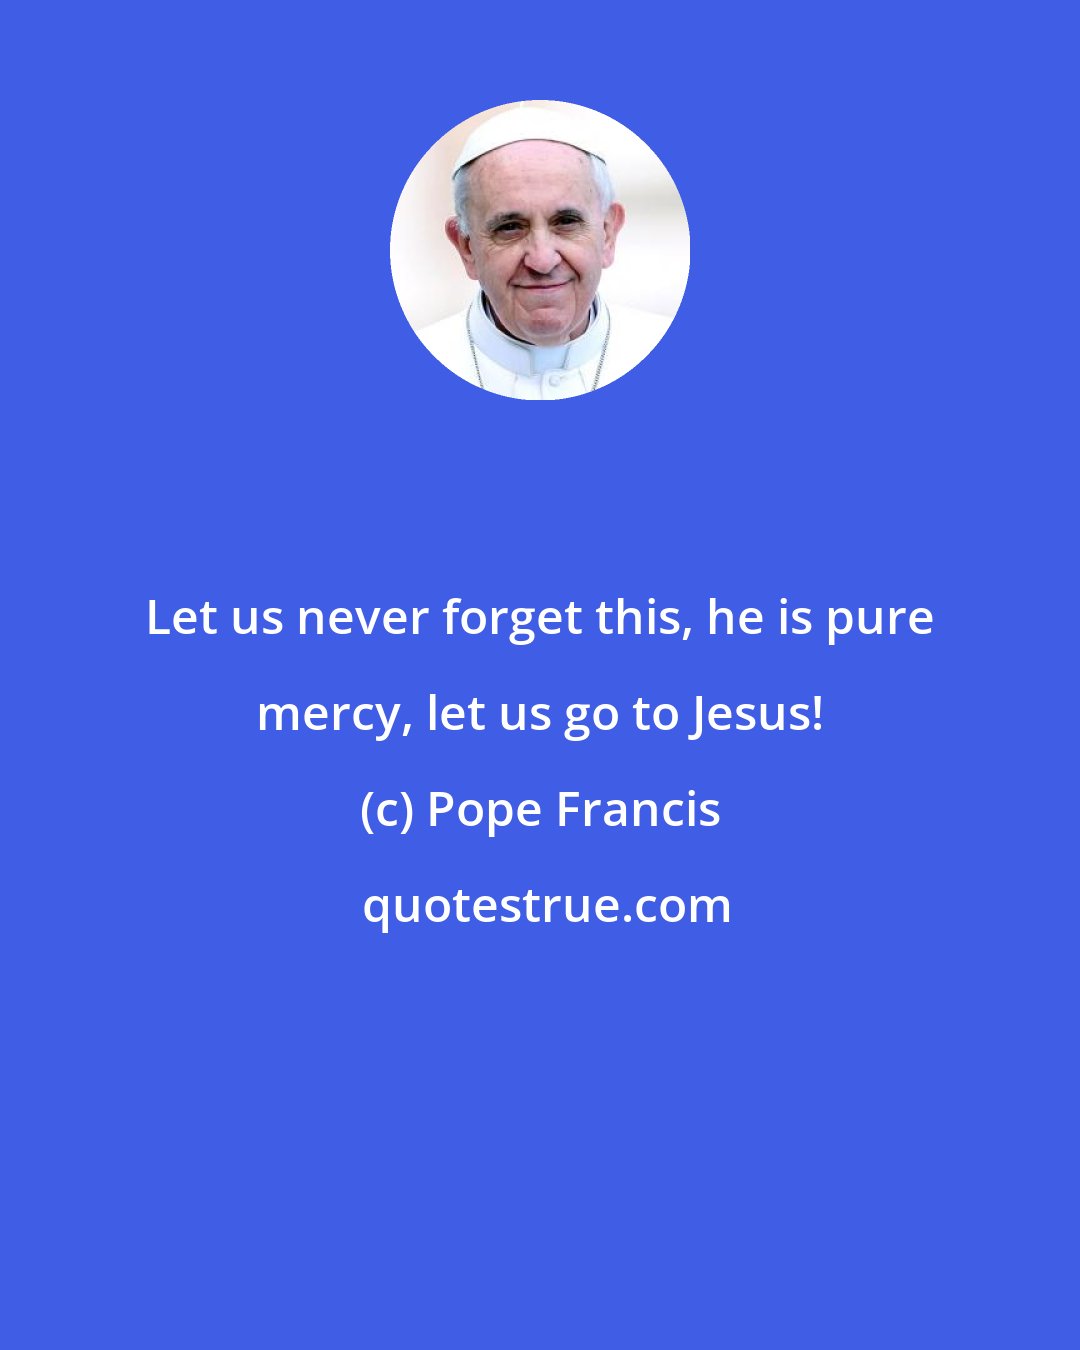 Pope Francis: Let us never forget this, he is pure mercy, let us go to Jesus!